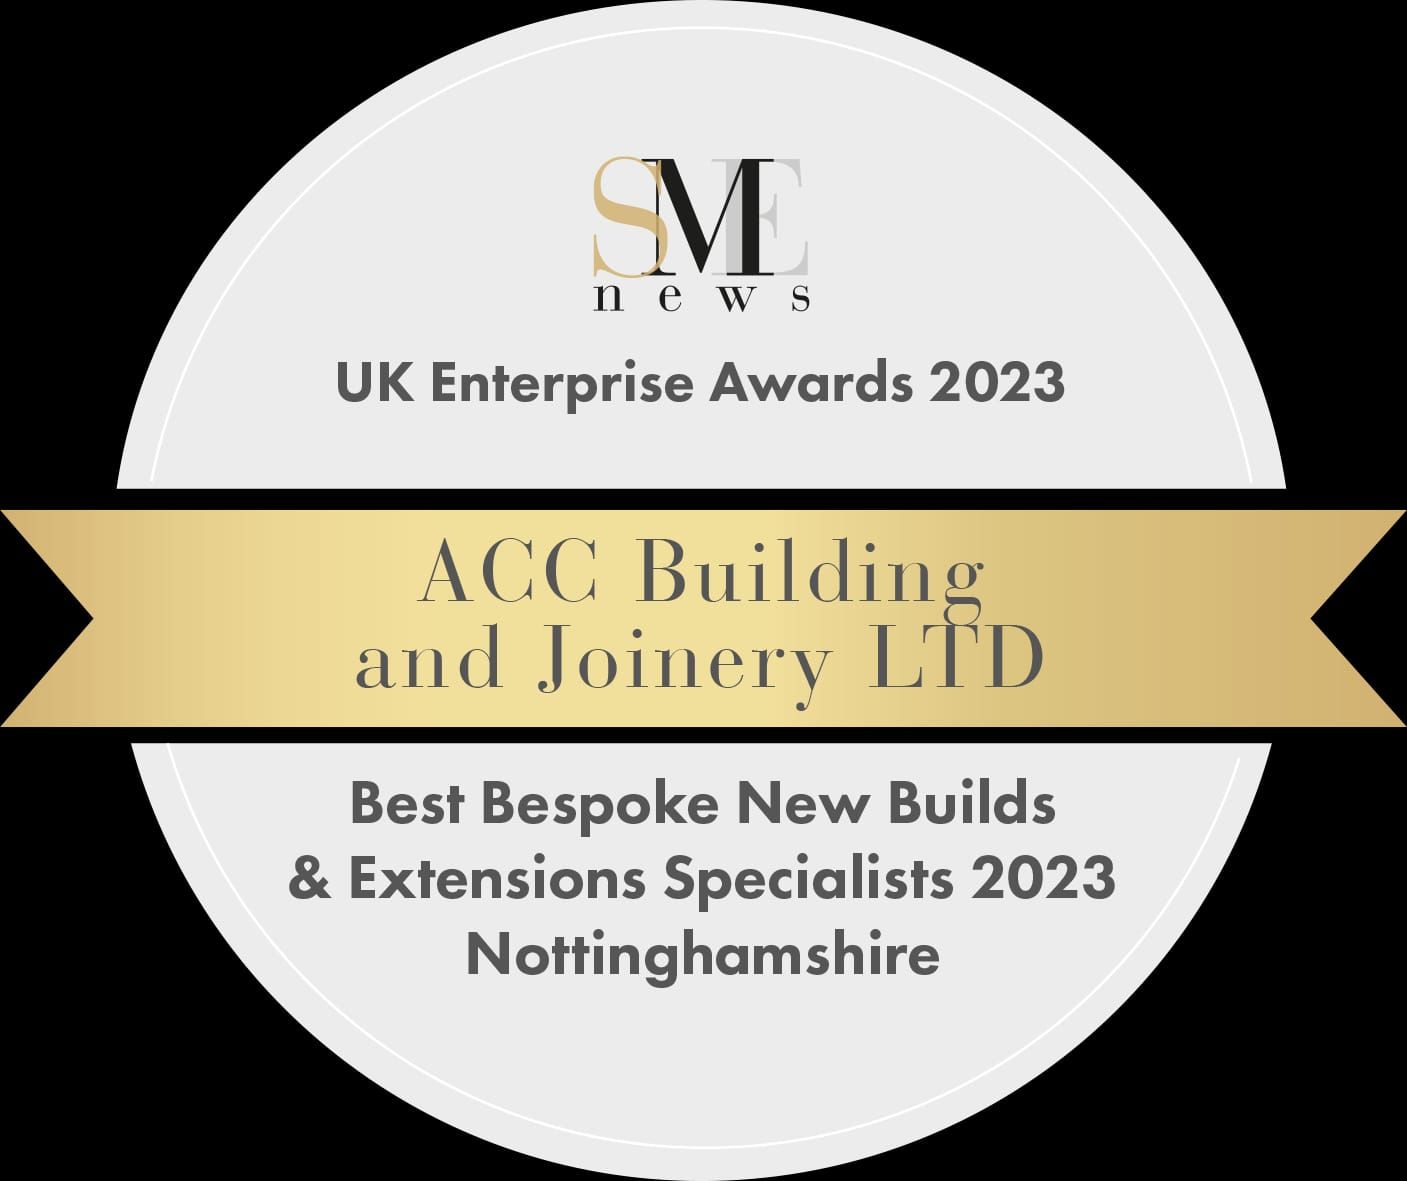 Best Bespoke New Build Award - ACC Building and Joinery